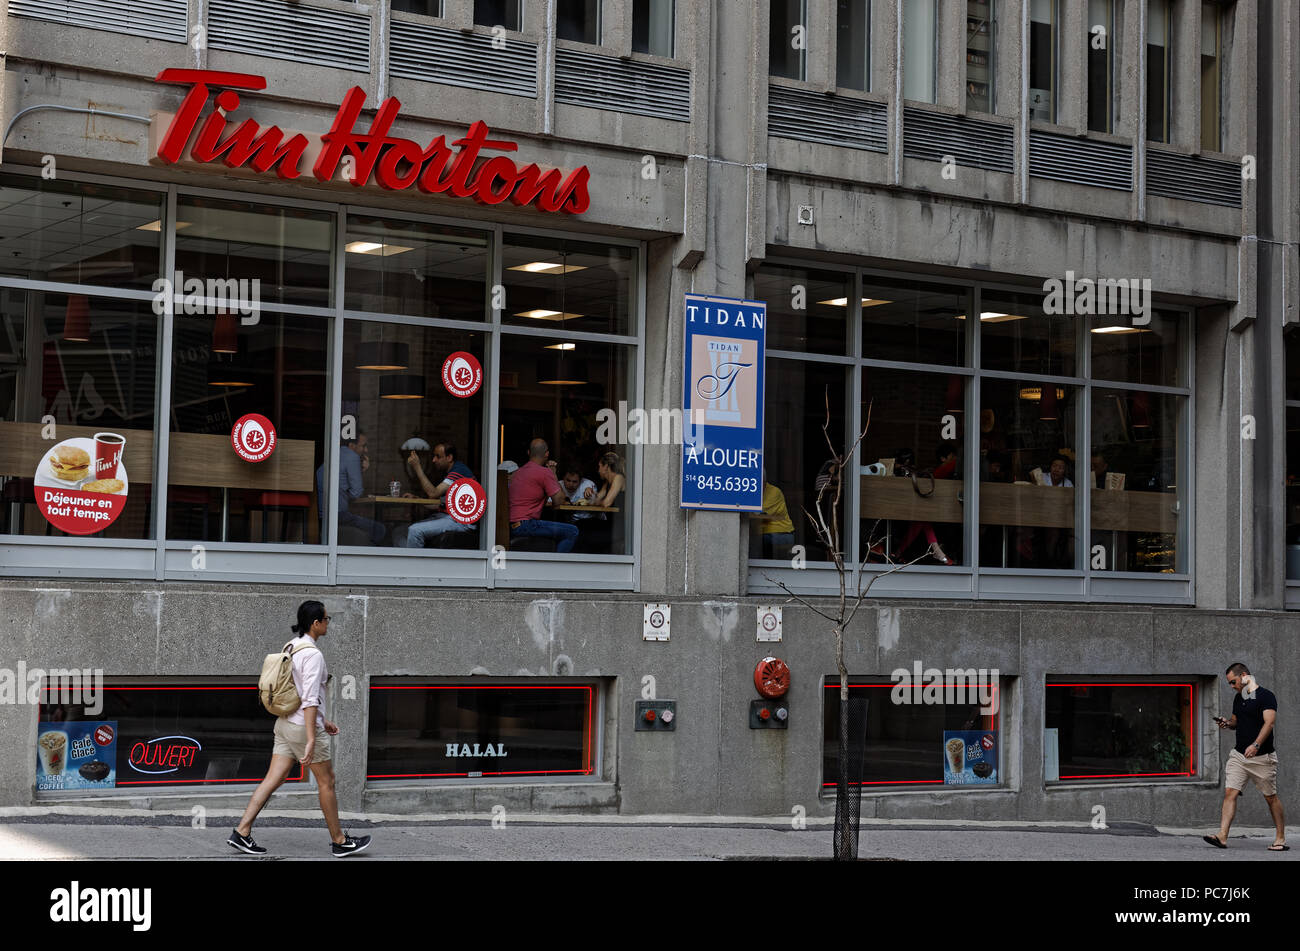 Tim Horton Coffee Shop, City of Montreal, Canada Editorial Stock Photo -  Image of tables, coffee: 52463333